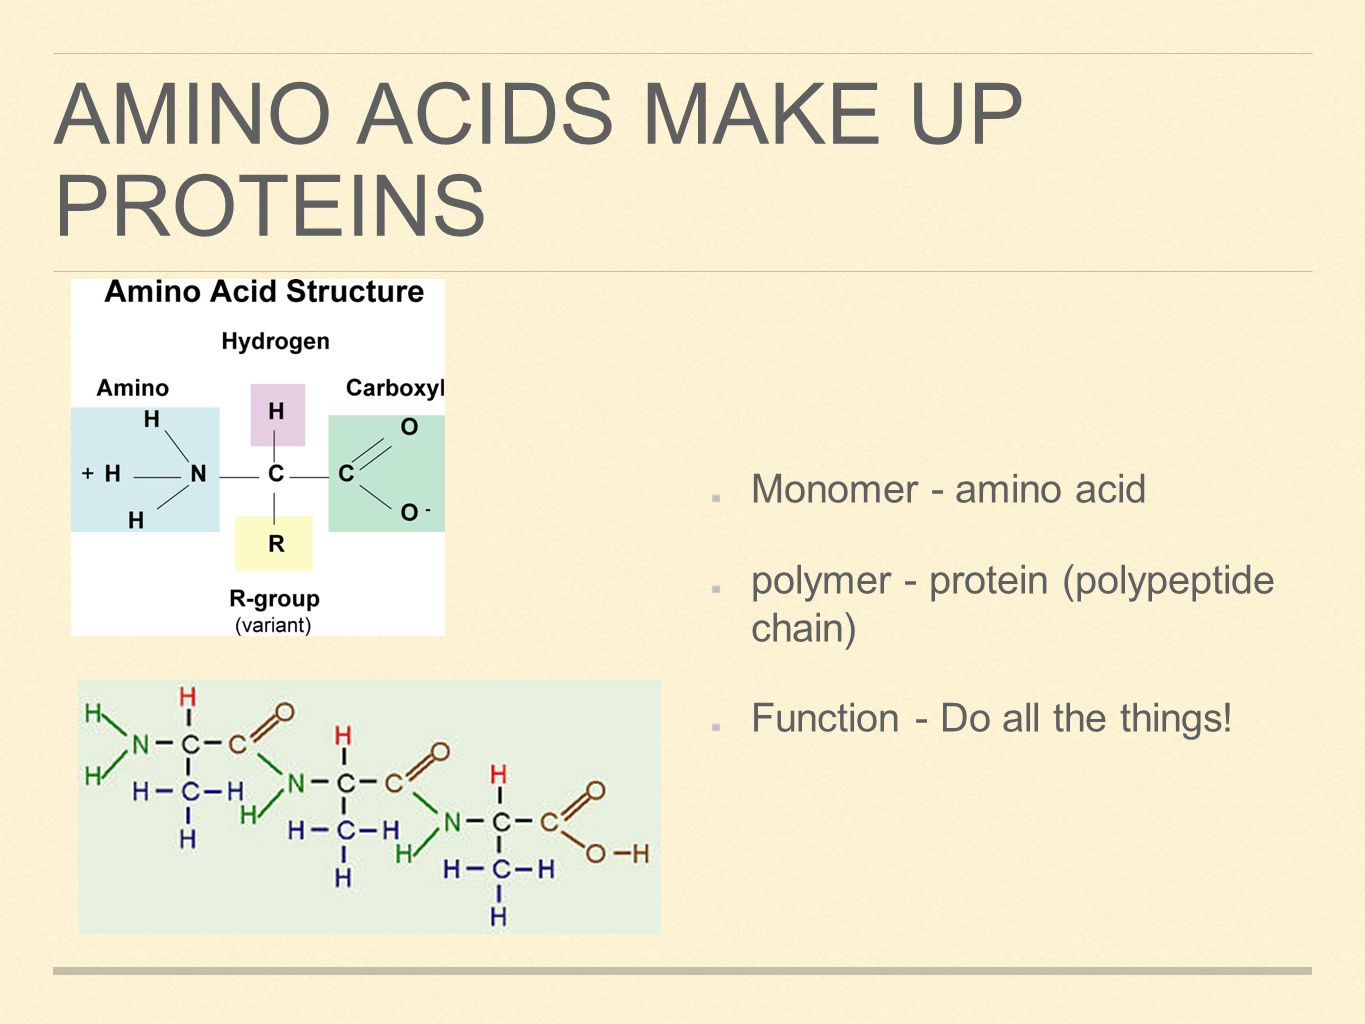 AMINO ACIDS MAKE UP PROTEINS Monomer - amino acid polymer - protein (polypeptide chain) Function - Do all the things!